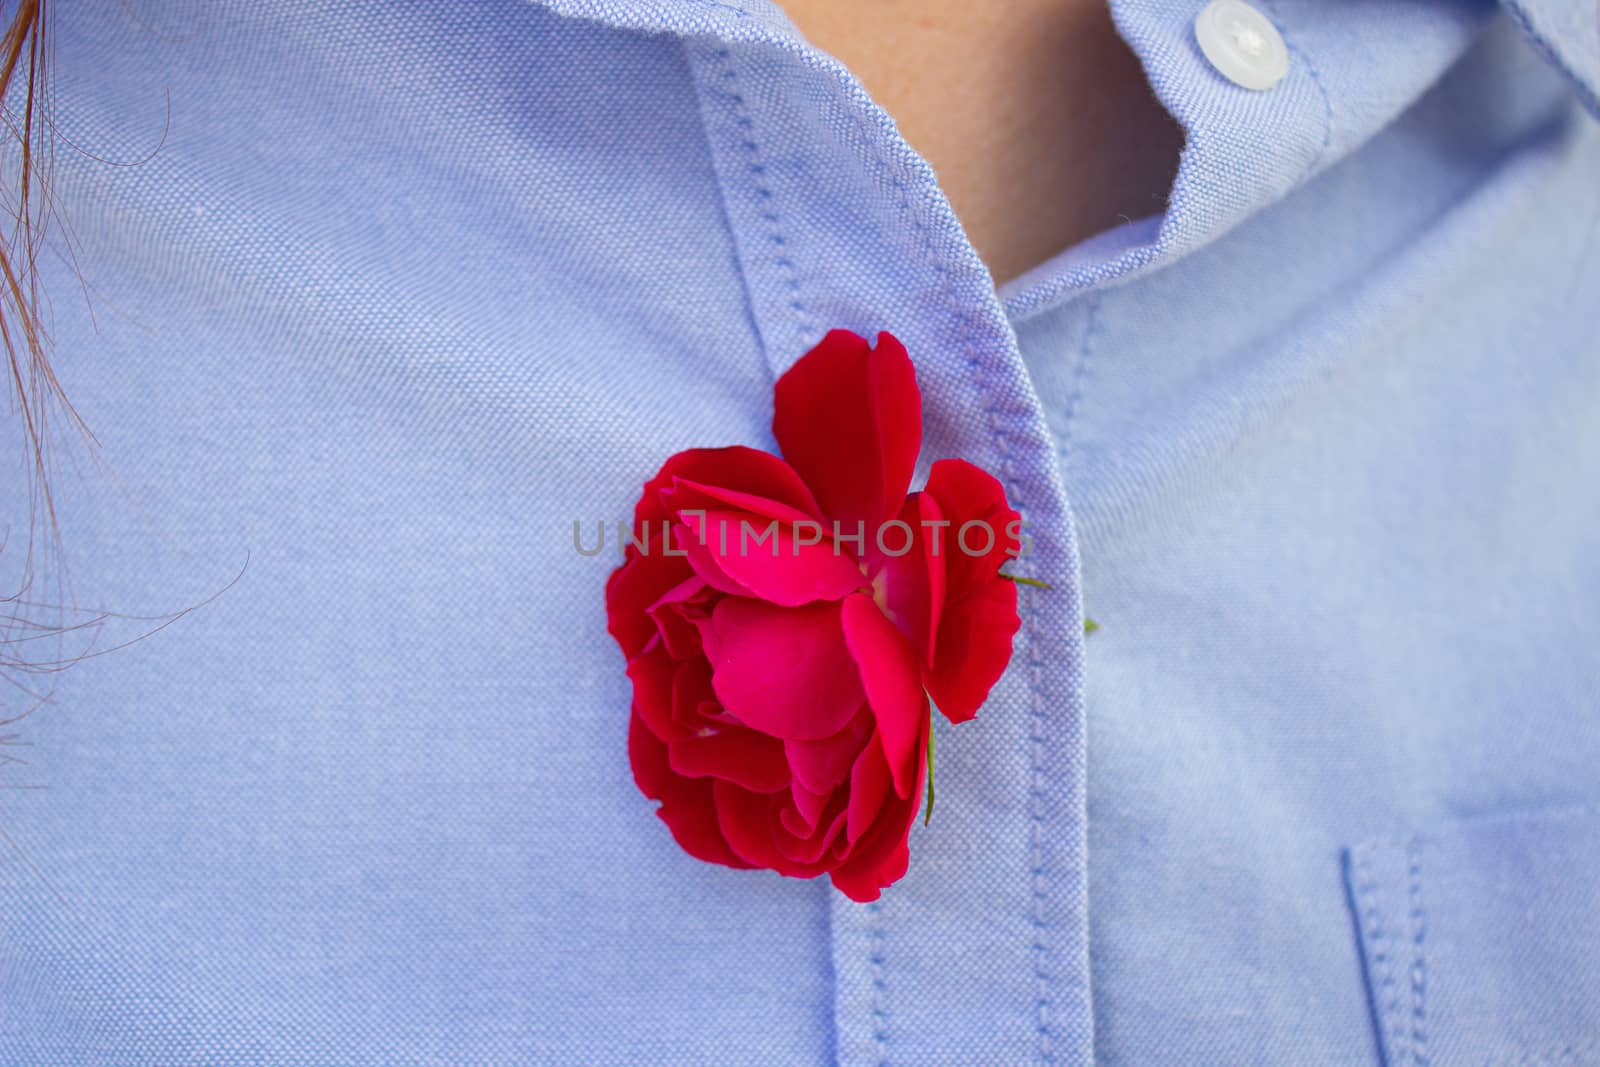 You are inside my heart - motivation inspiration quote of love. Red rose on background of blue denim shirt. still life with rose flower. Valentine's day greeting concept.